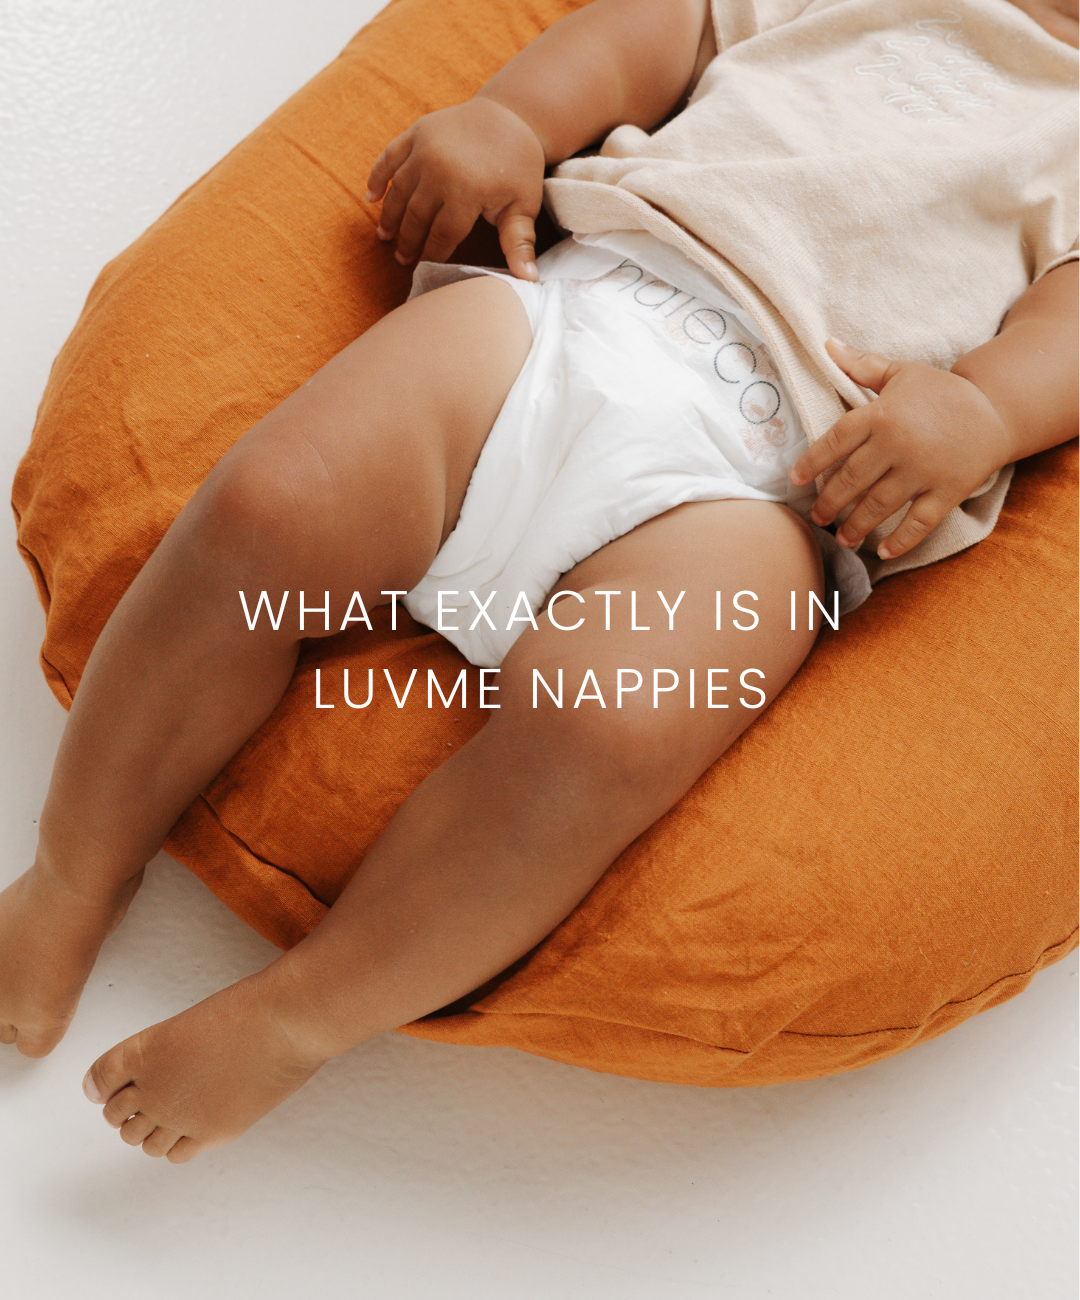 What Exactly is in Luvme Nappies?